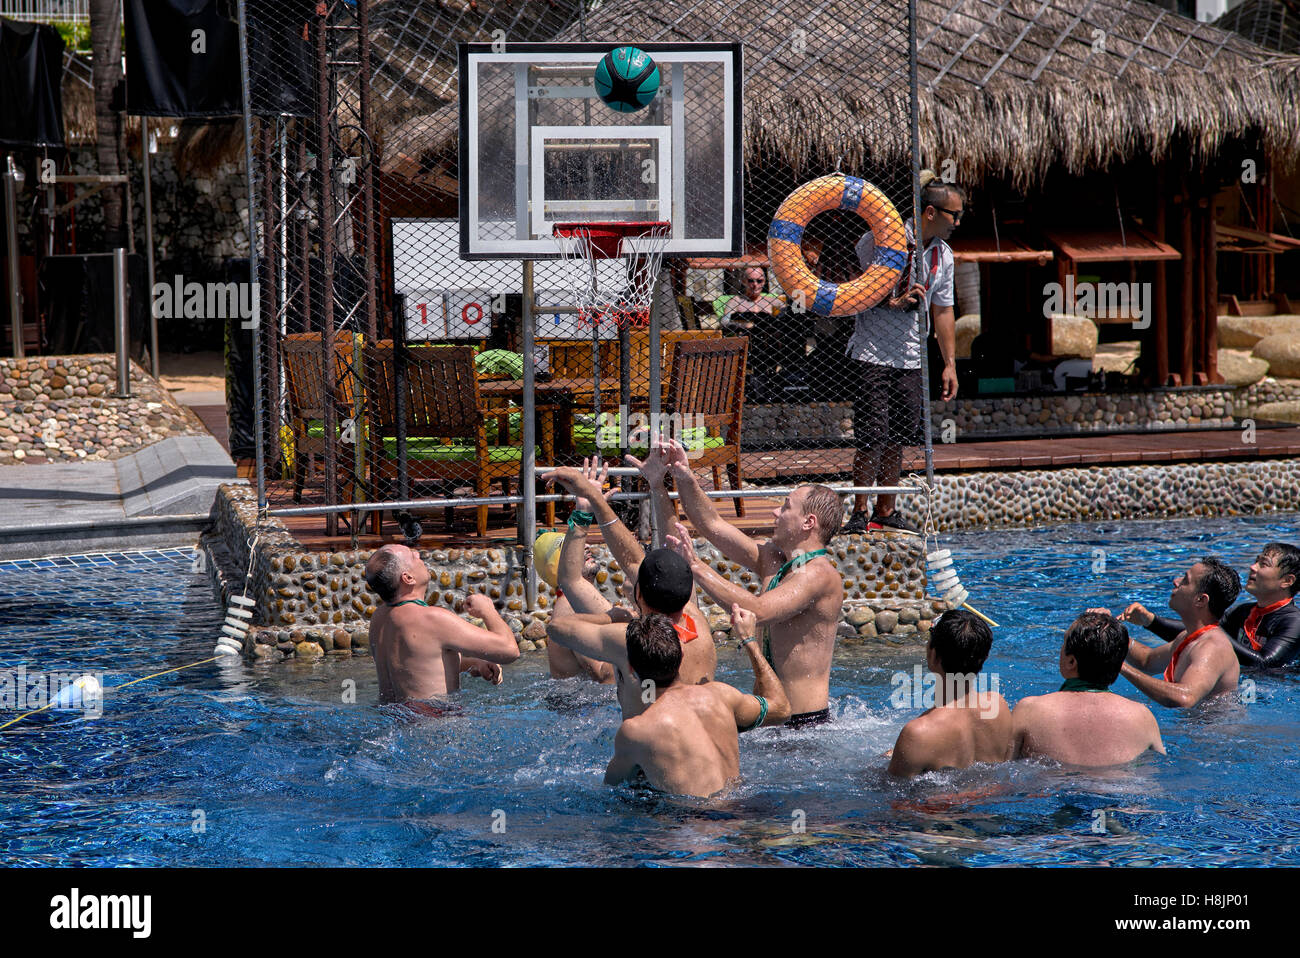 Water polo. Group of male tourists playing water polo at the Hard Rock Hotel, Pattaya Thailand S. E. Asia Stock Photo